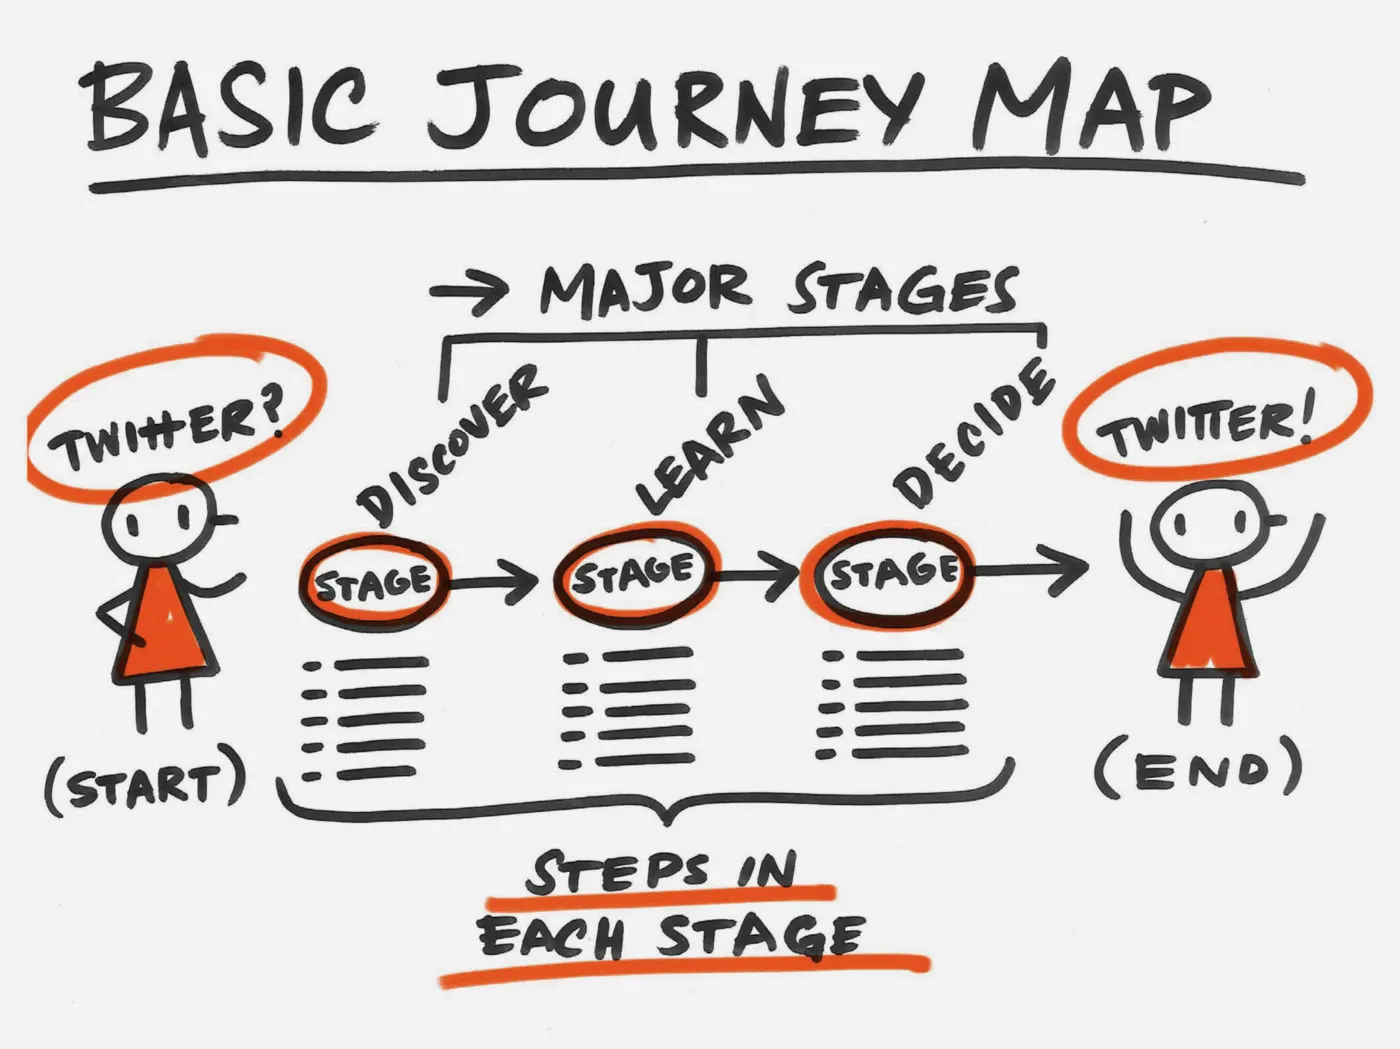 Black marker sketch with the heading "Basic Journey Map Steps in Each Stage," the subhead "Major Stages" and list headings for Discover. Learn. Decide.